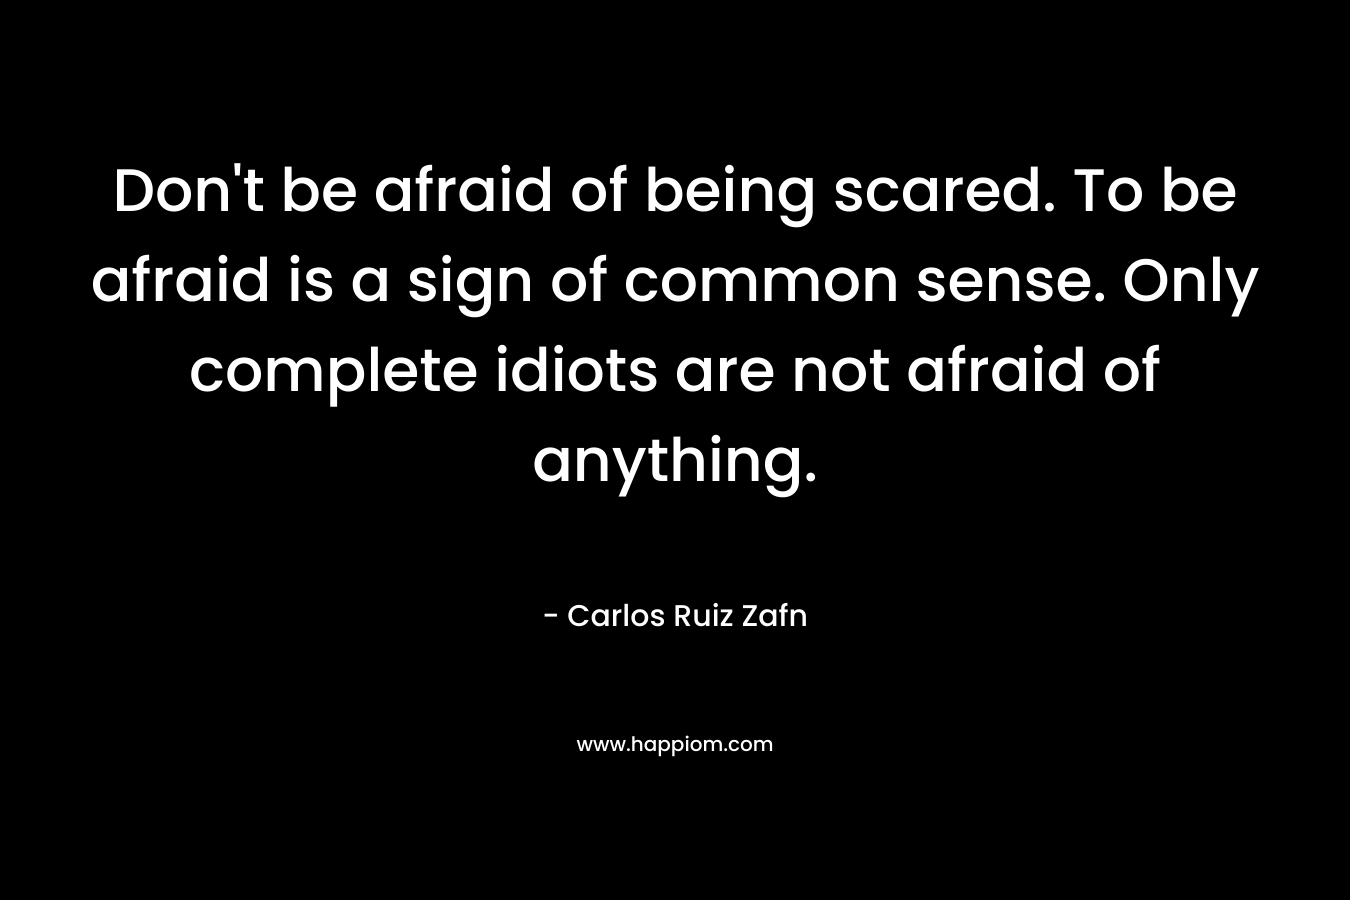 Don't be afraid of being scared. To be afraid is a sign of common sense. Only complete idiots are not afraid of anything.